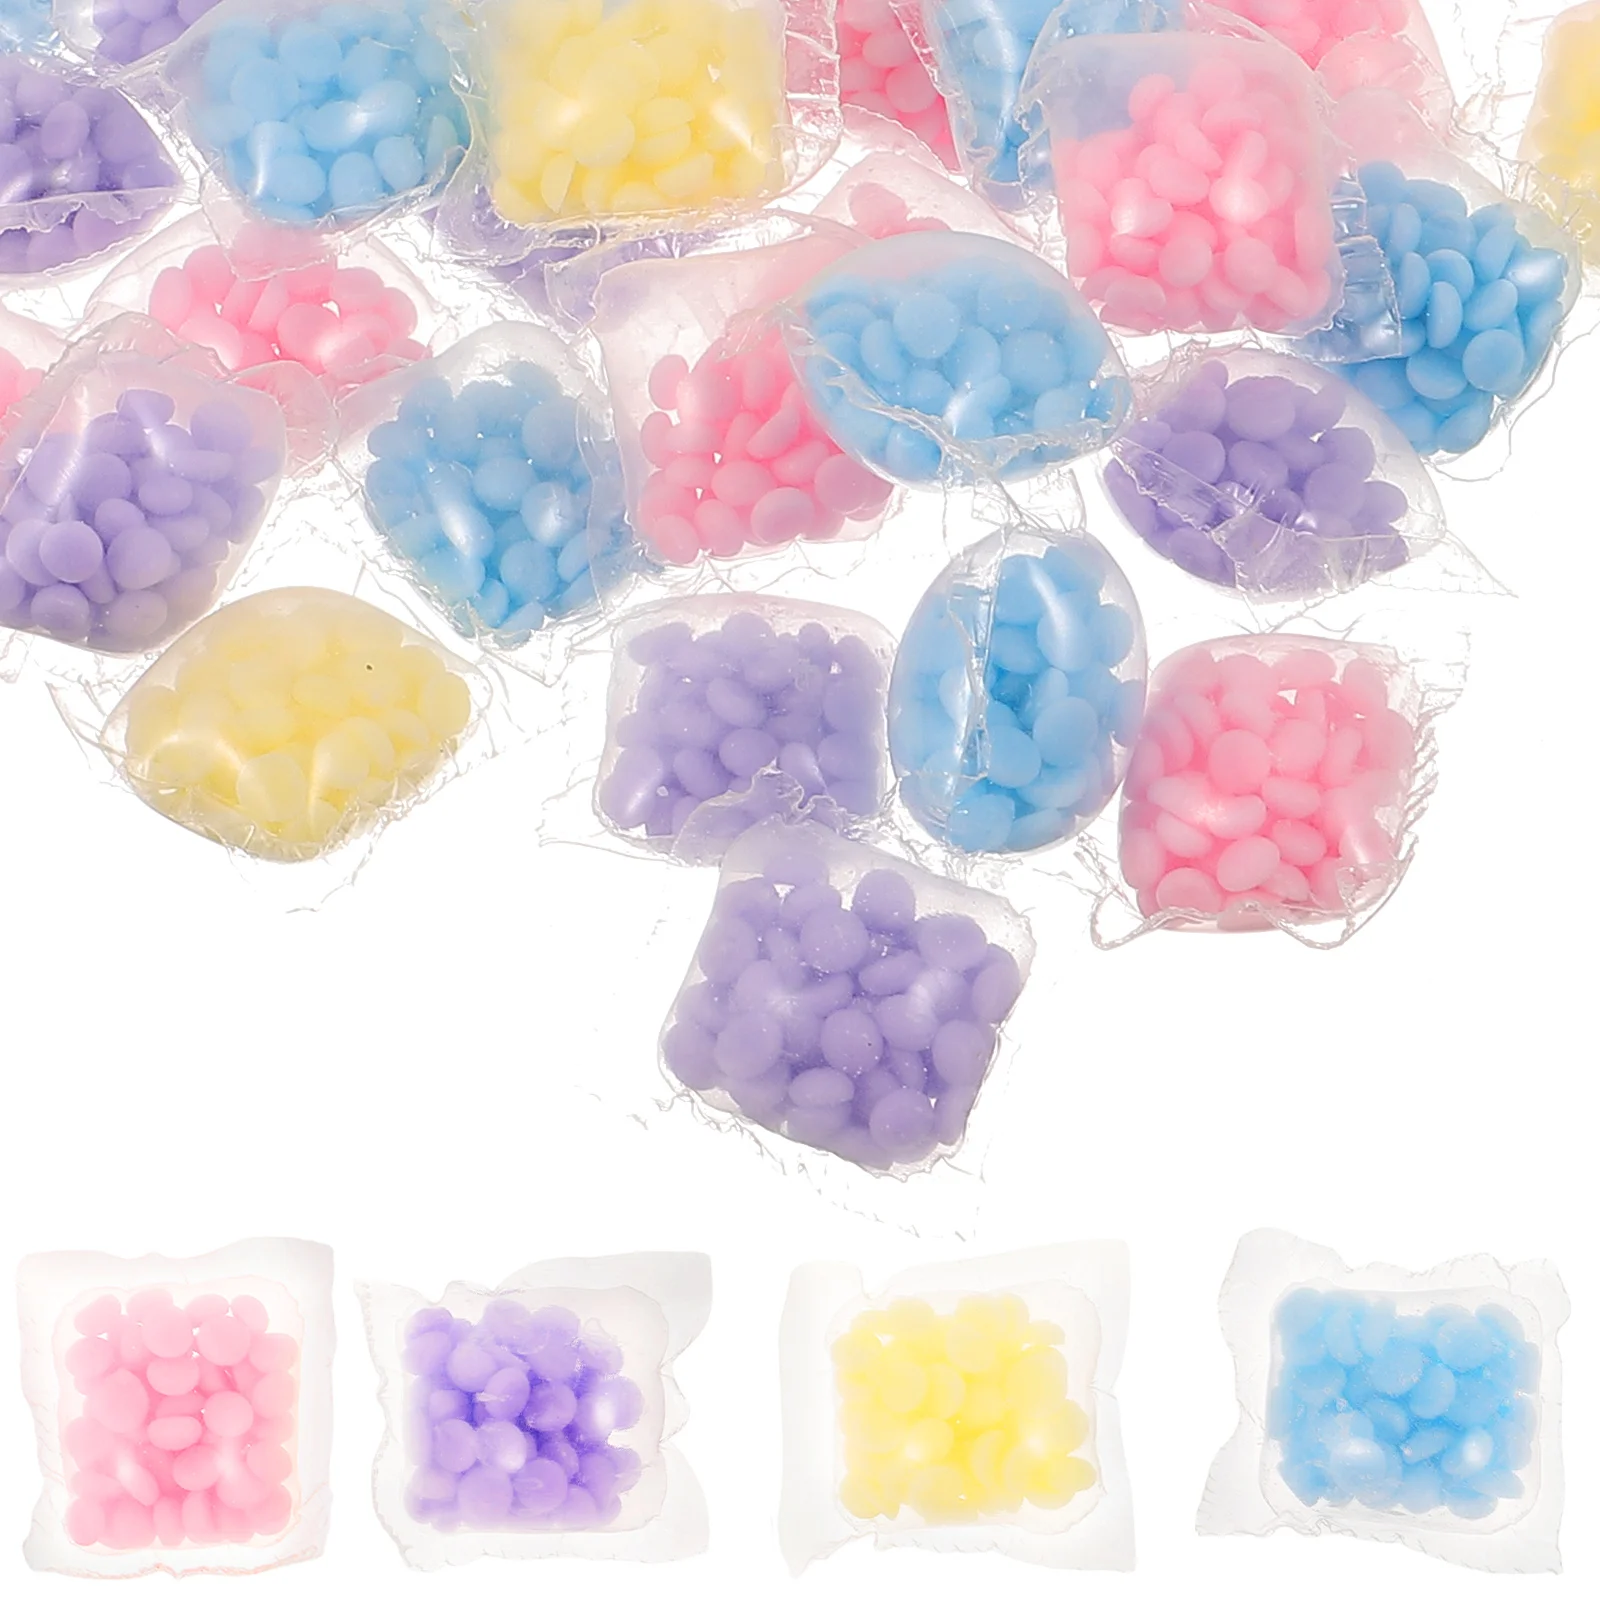 Artibetter Laundry Scent Booster Beads - 50Pcs Mixed Color In-Wash Fragrance & Fabric Softener for Washer